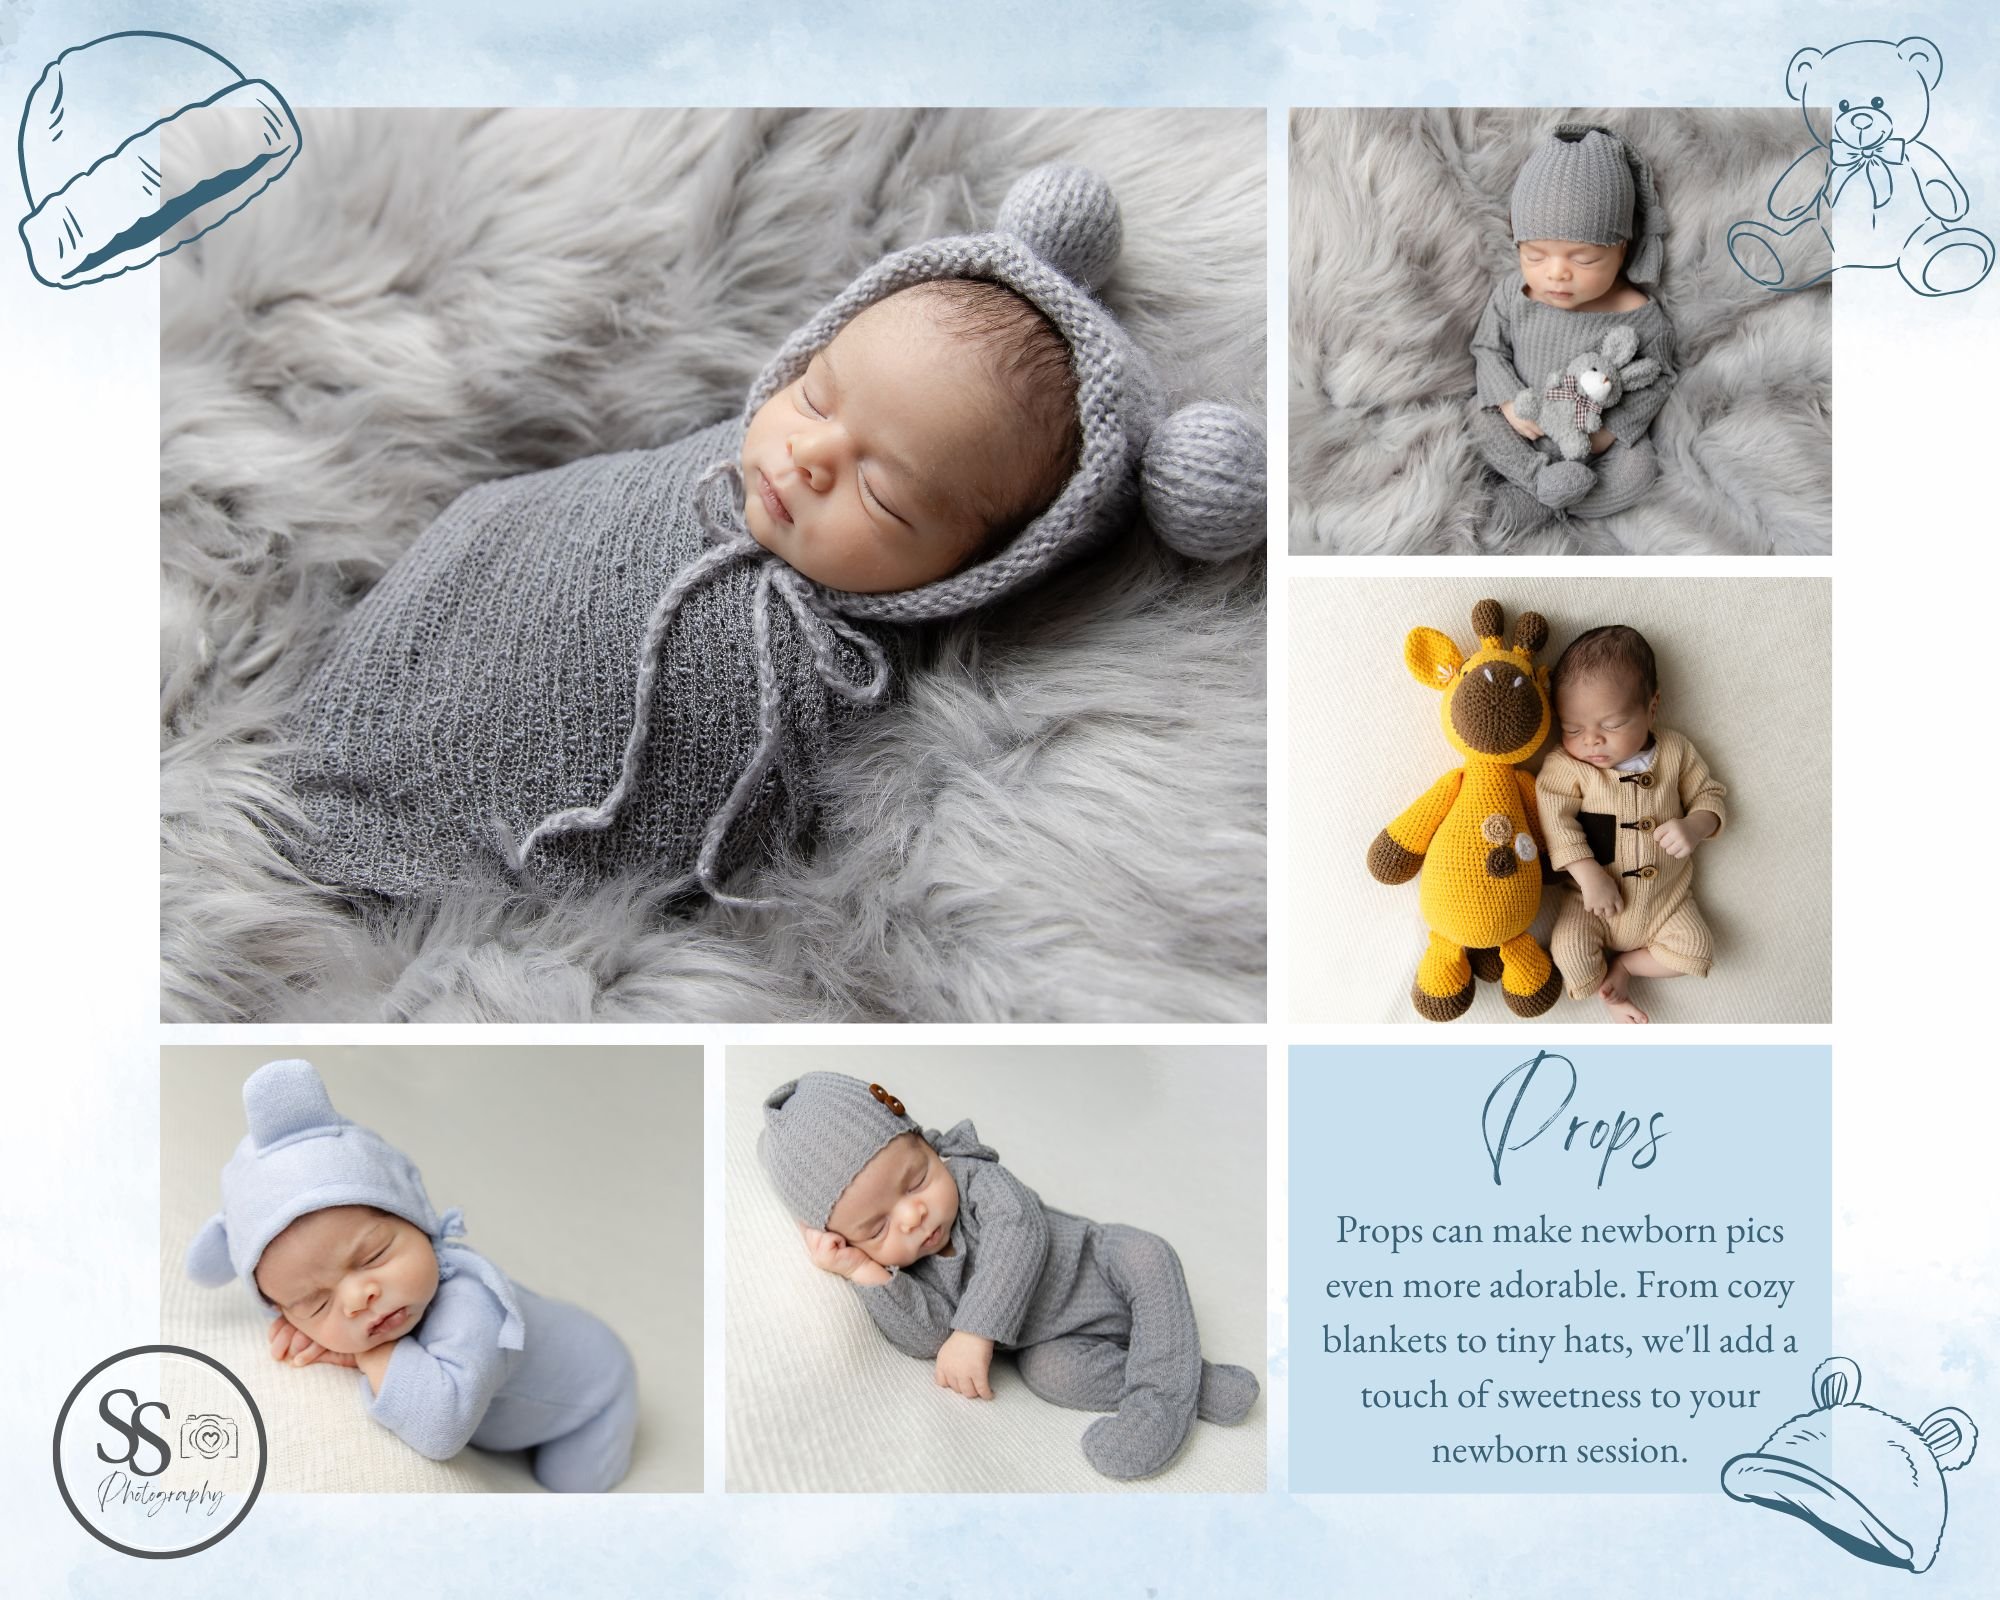 Newborn Portraits Sleepy Props: Props can make newborn pics even more adorable. From cozy blankets to tiny hats, we'll add a touch of sweetness to your newborn session.

https://www.shawnspencerphotography.com/contact

#elkgrovenewbornportraits #elkg